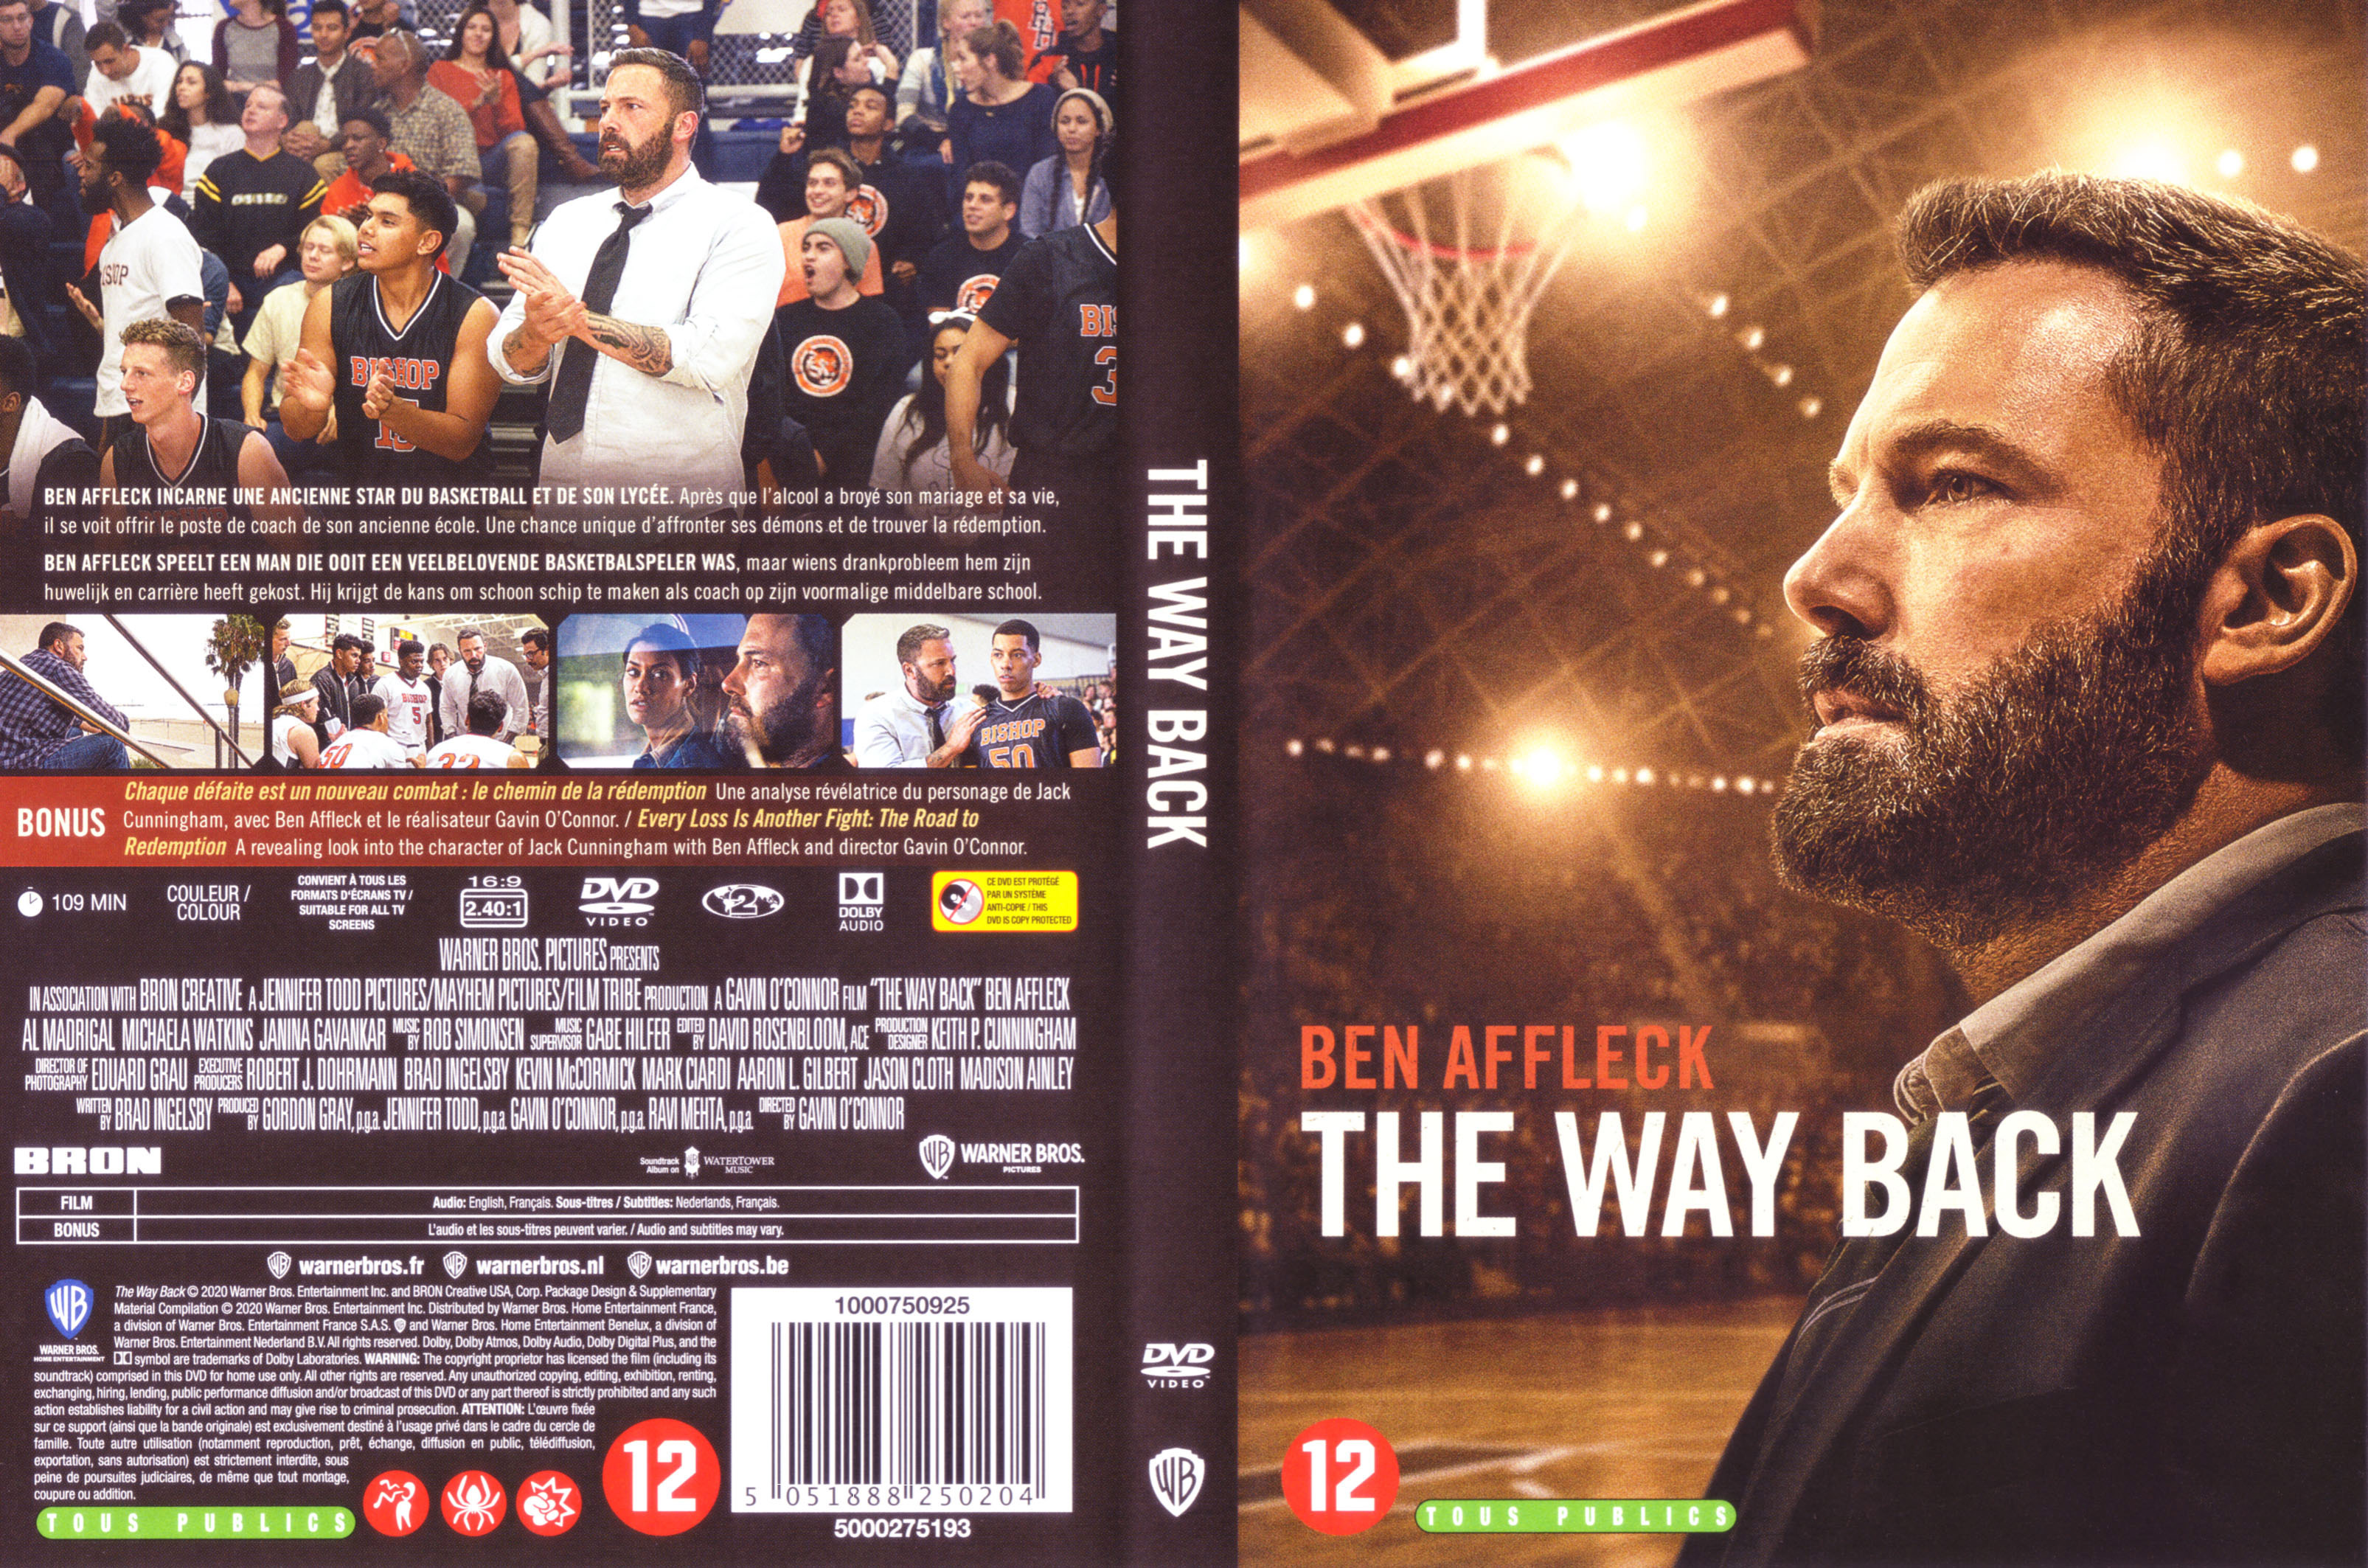 Jaquette DVD The way back